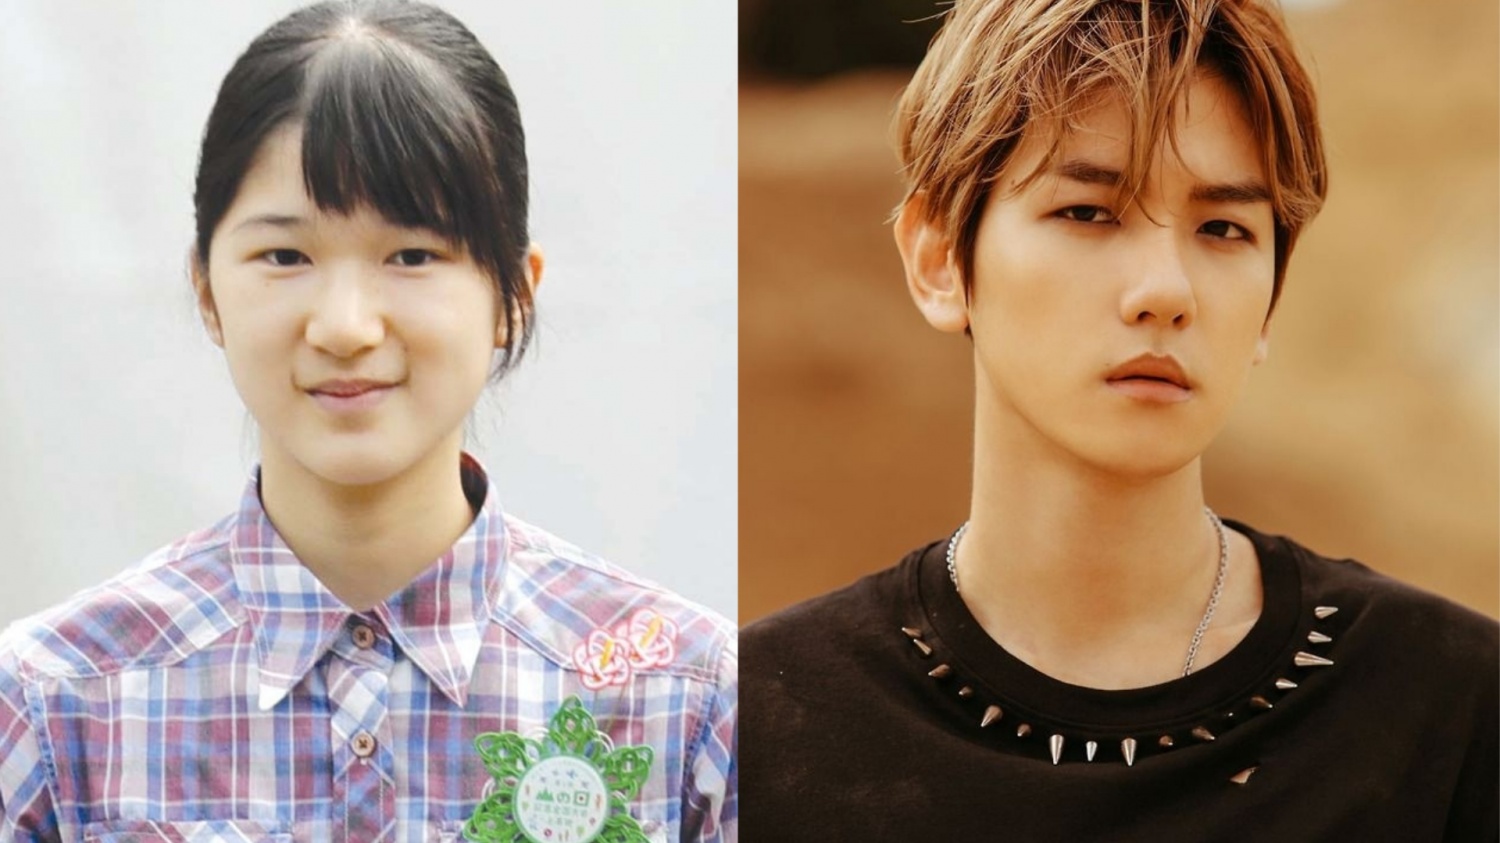 Princess Aiko of Japan Wants to Attend EXO’s Concert and See Baekhyun